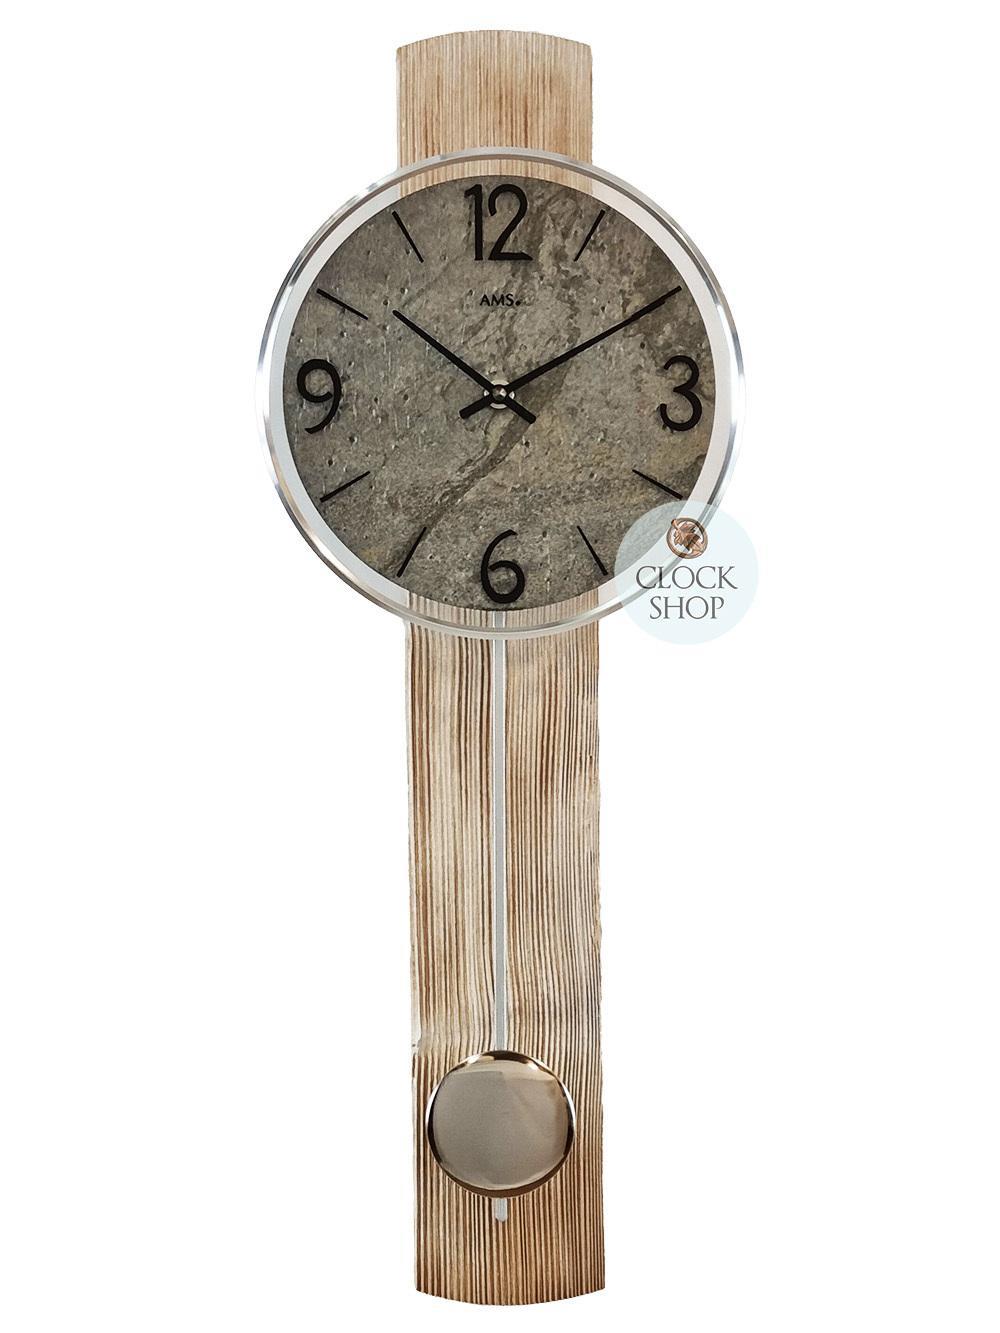 60cm Oak Pendulum Wall Clock With Grey Stone Dial By AMS